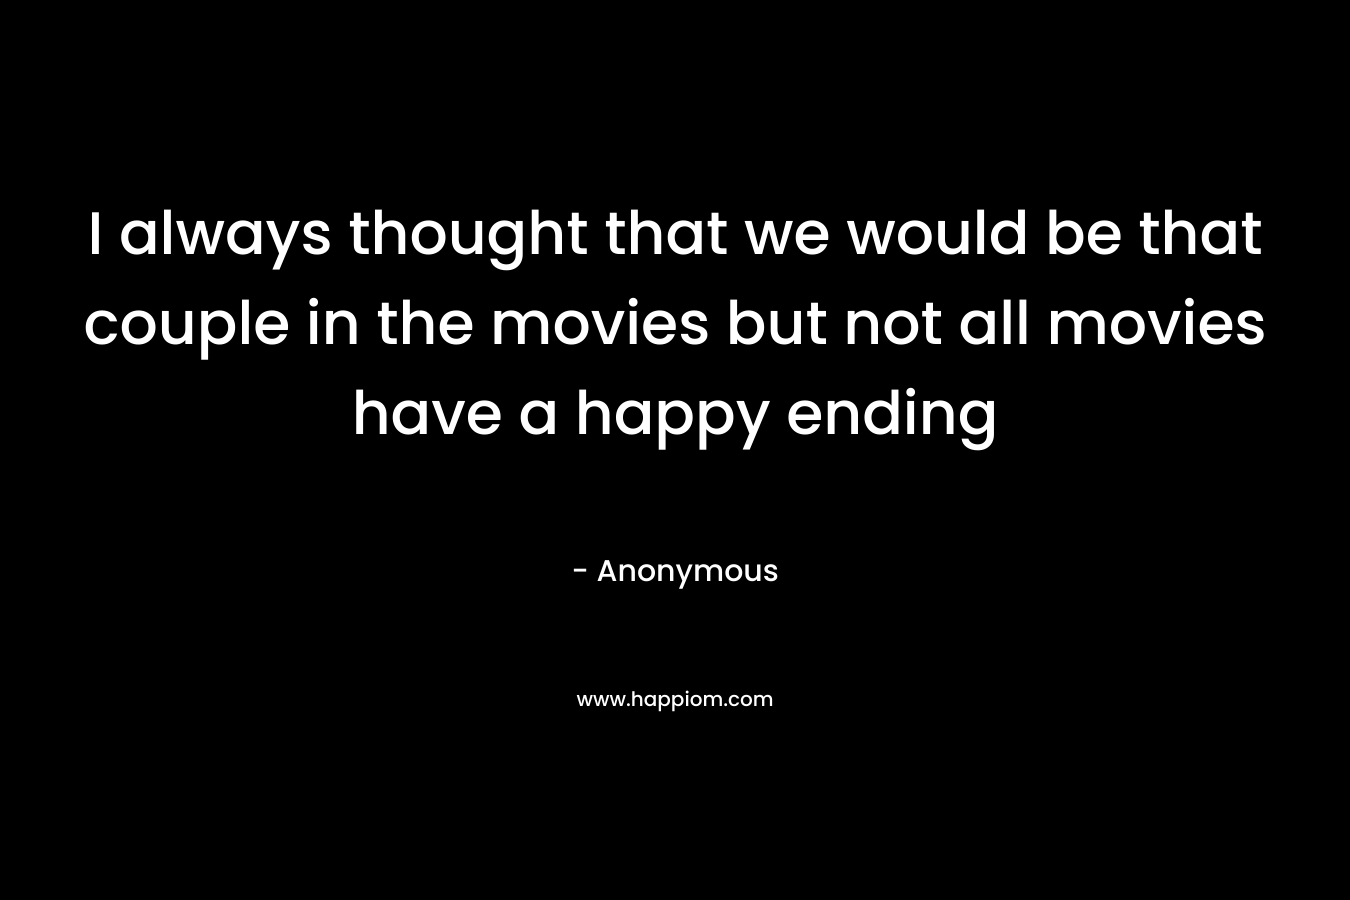 I always thought that we would be that couple in the movies but not all movies have a happy ending